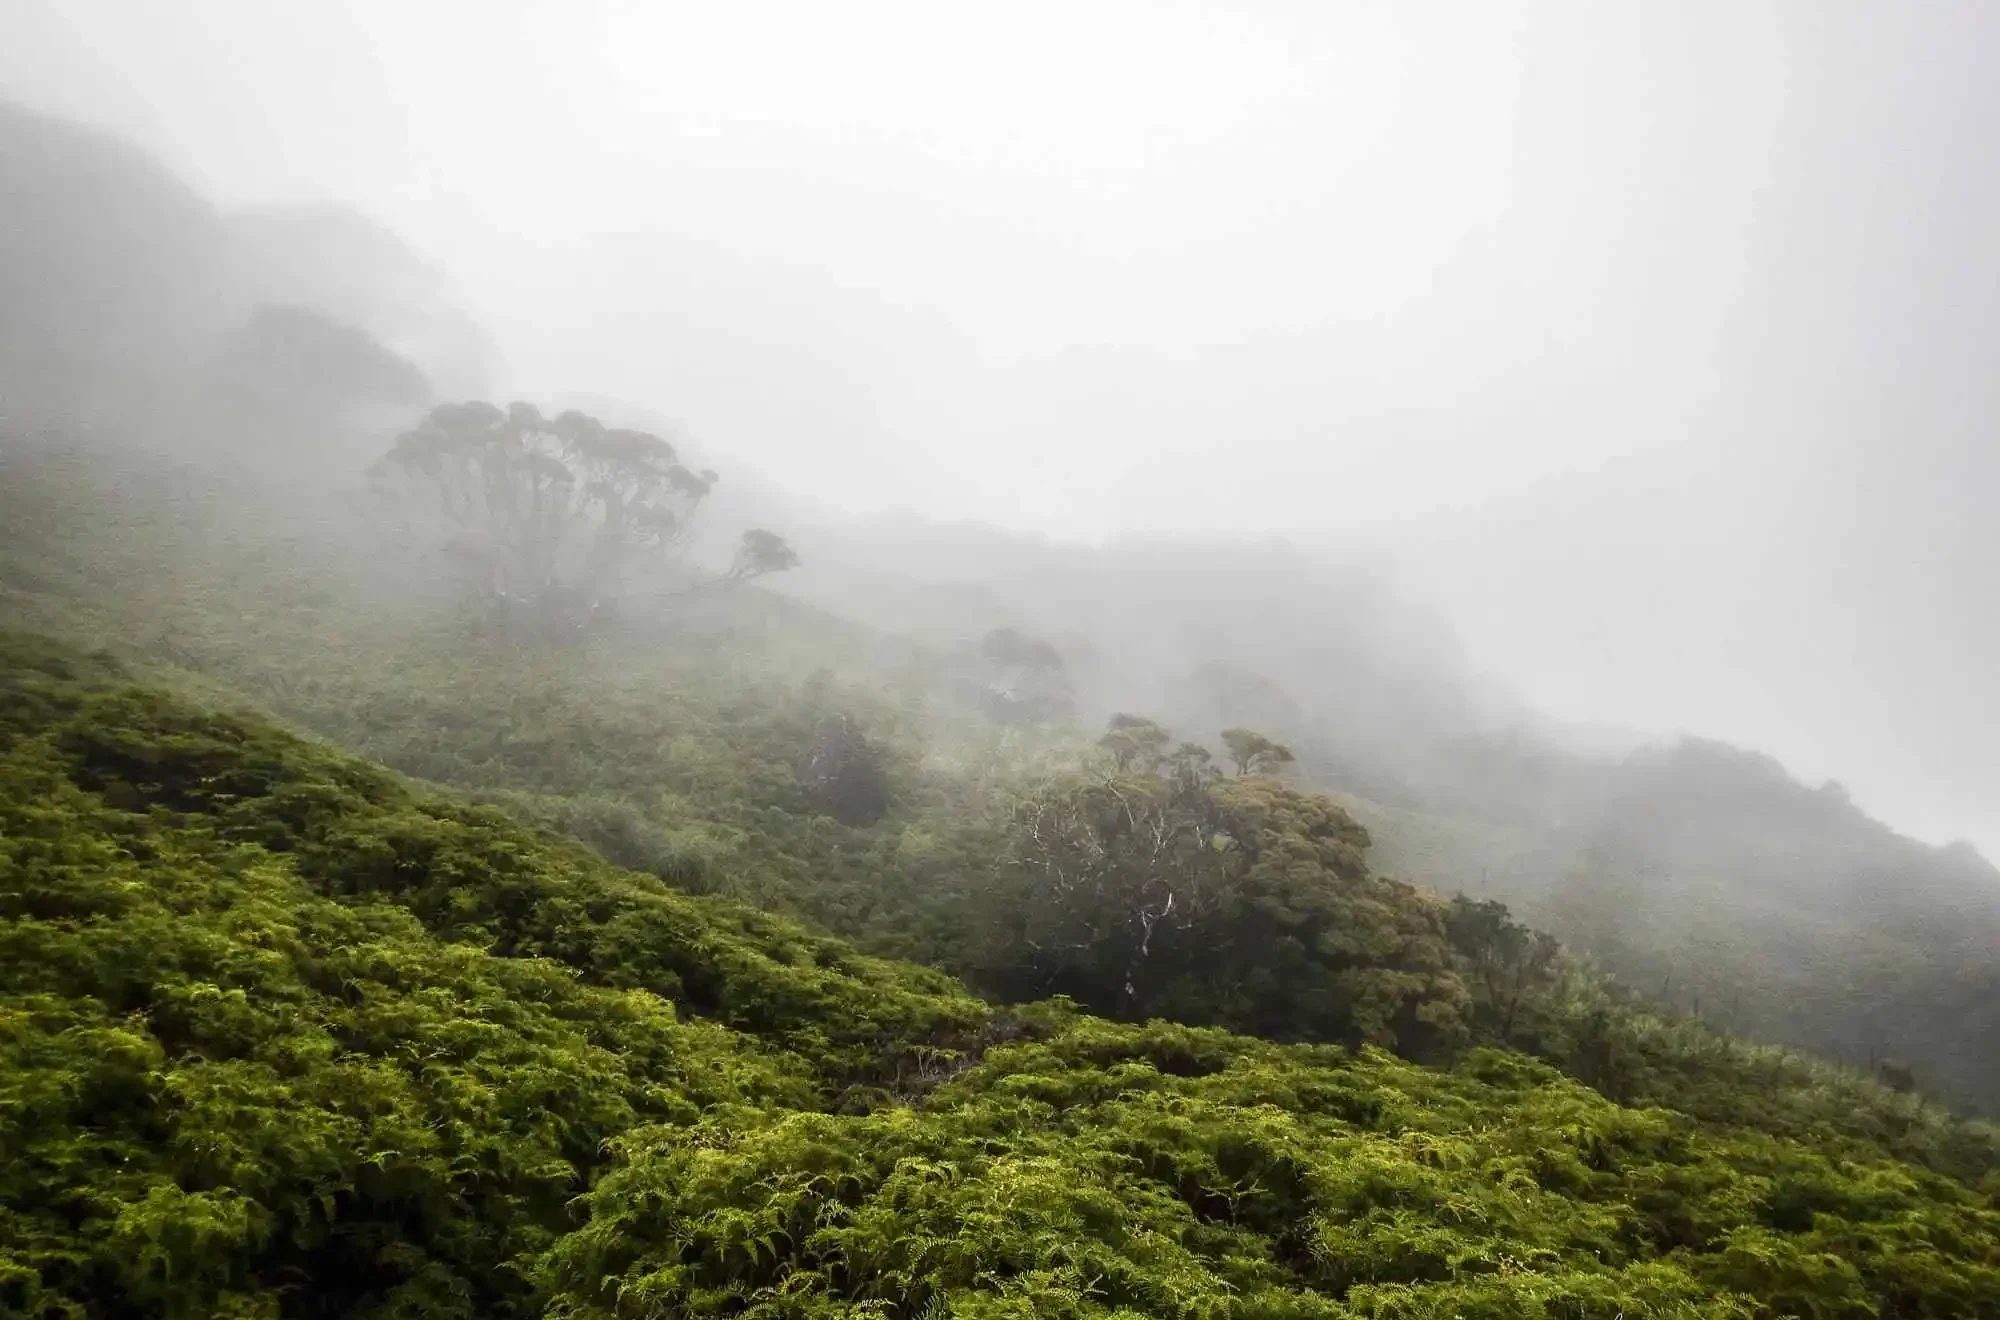 Moisture rises into the clouds from the lush green rainforest mountainside